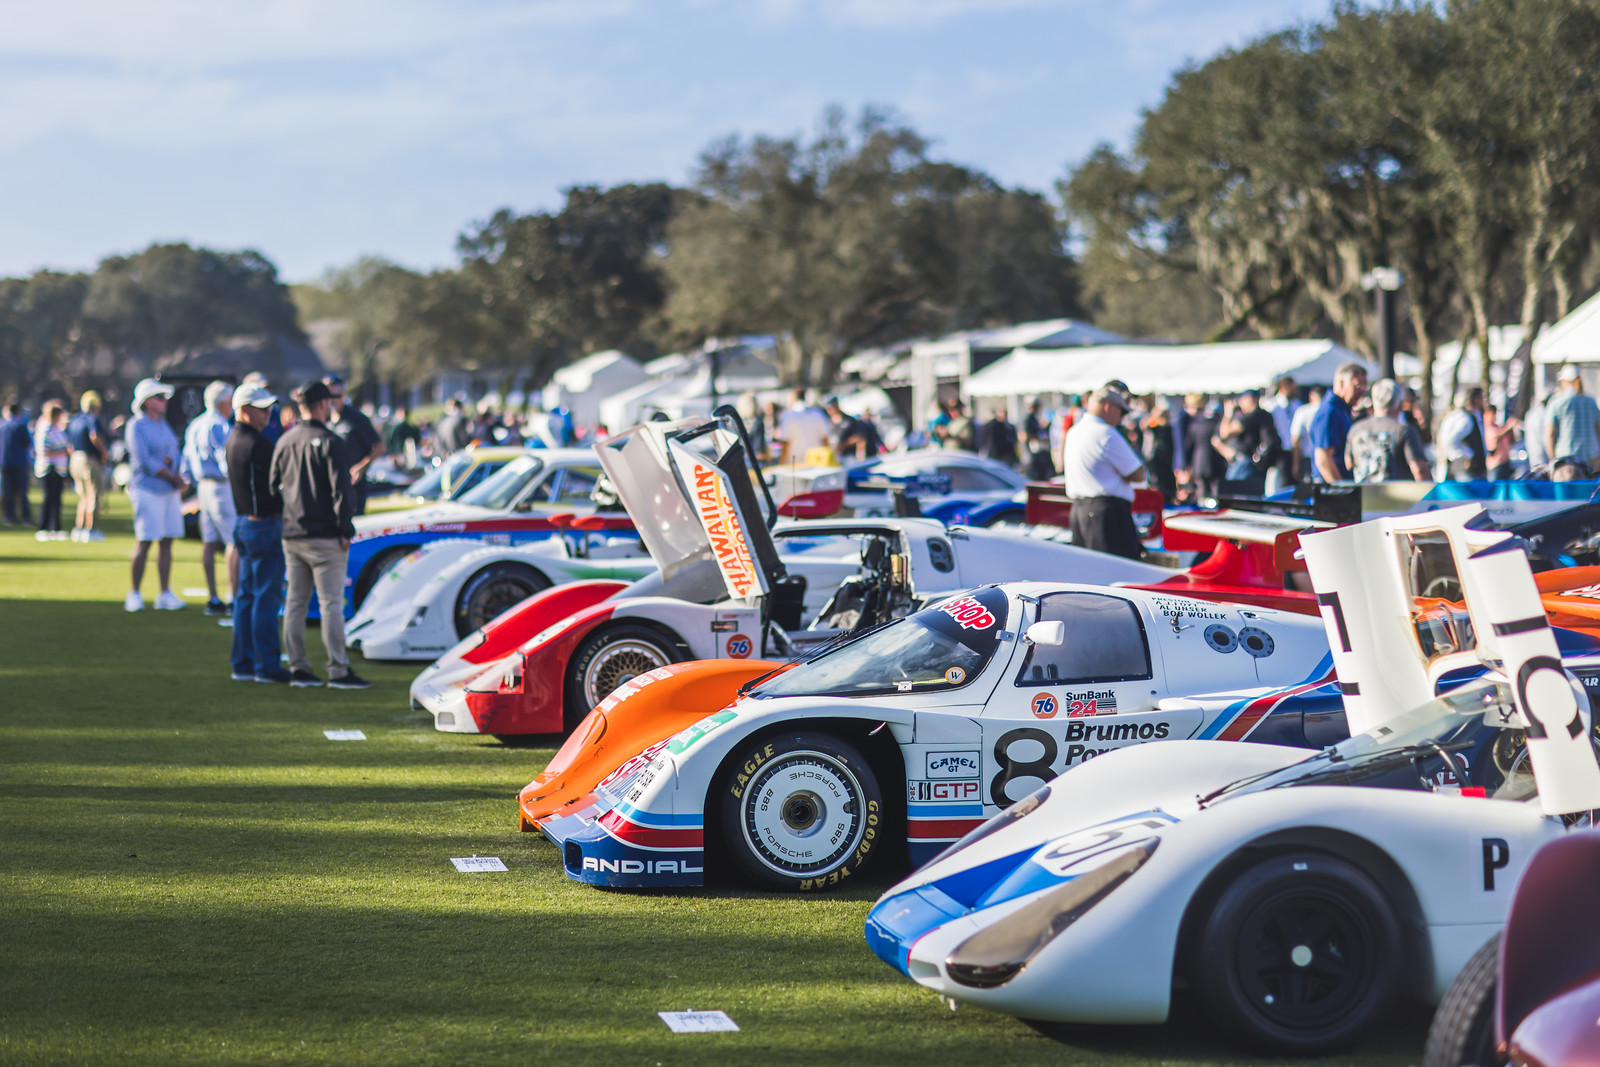 2022 Amelia Concours - Concours Field & Crowd 0085AA 